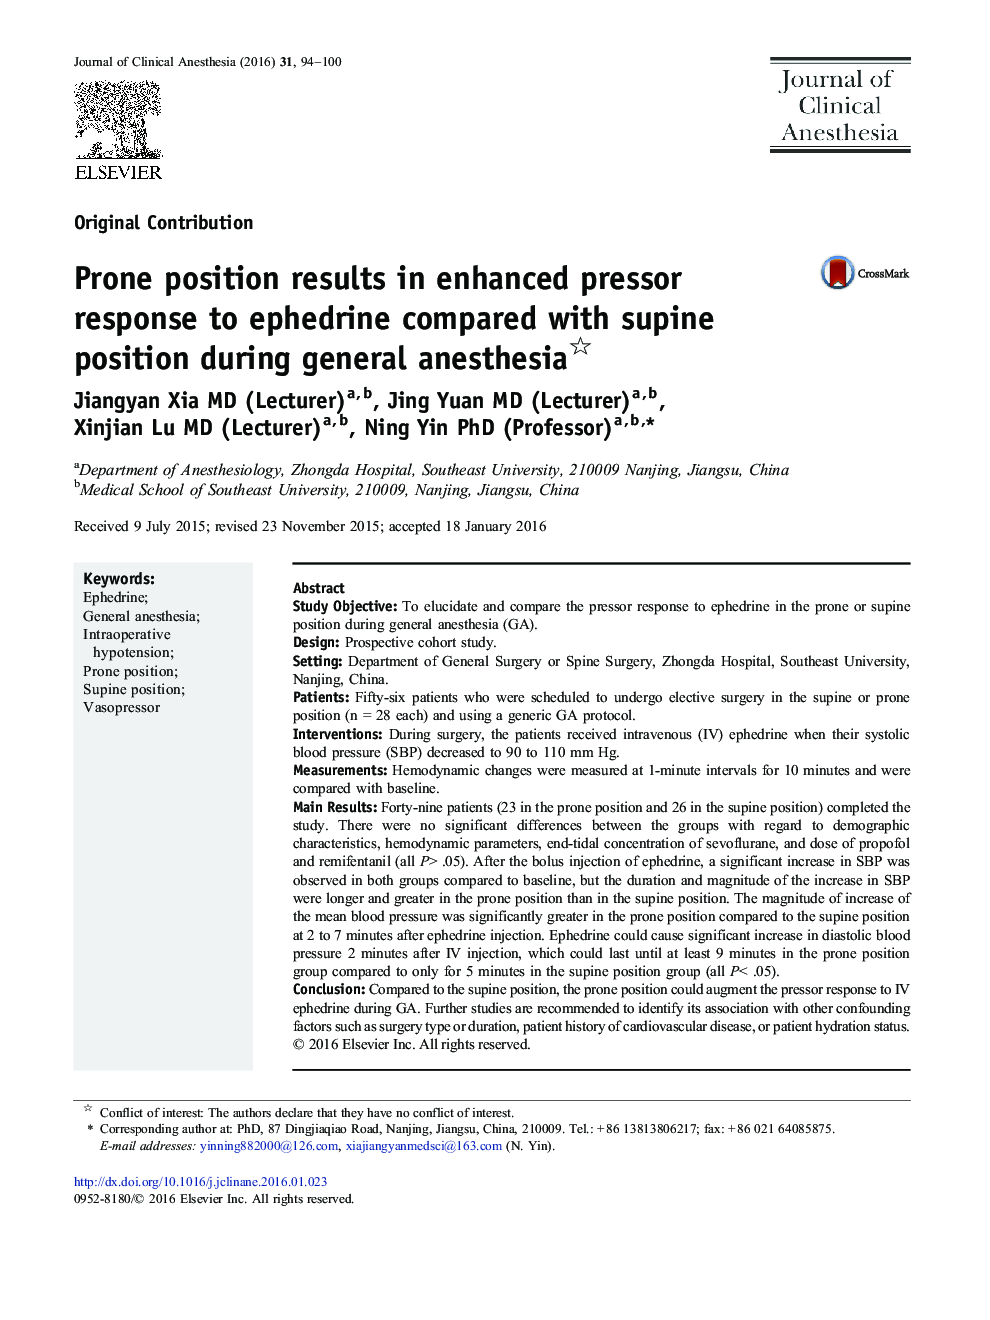 Prone position results in enhanced pressor response to ephedrine compared with supine position during general anesthesia